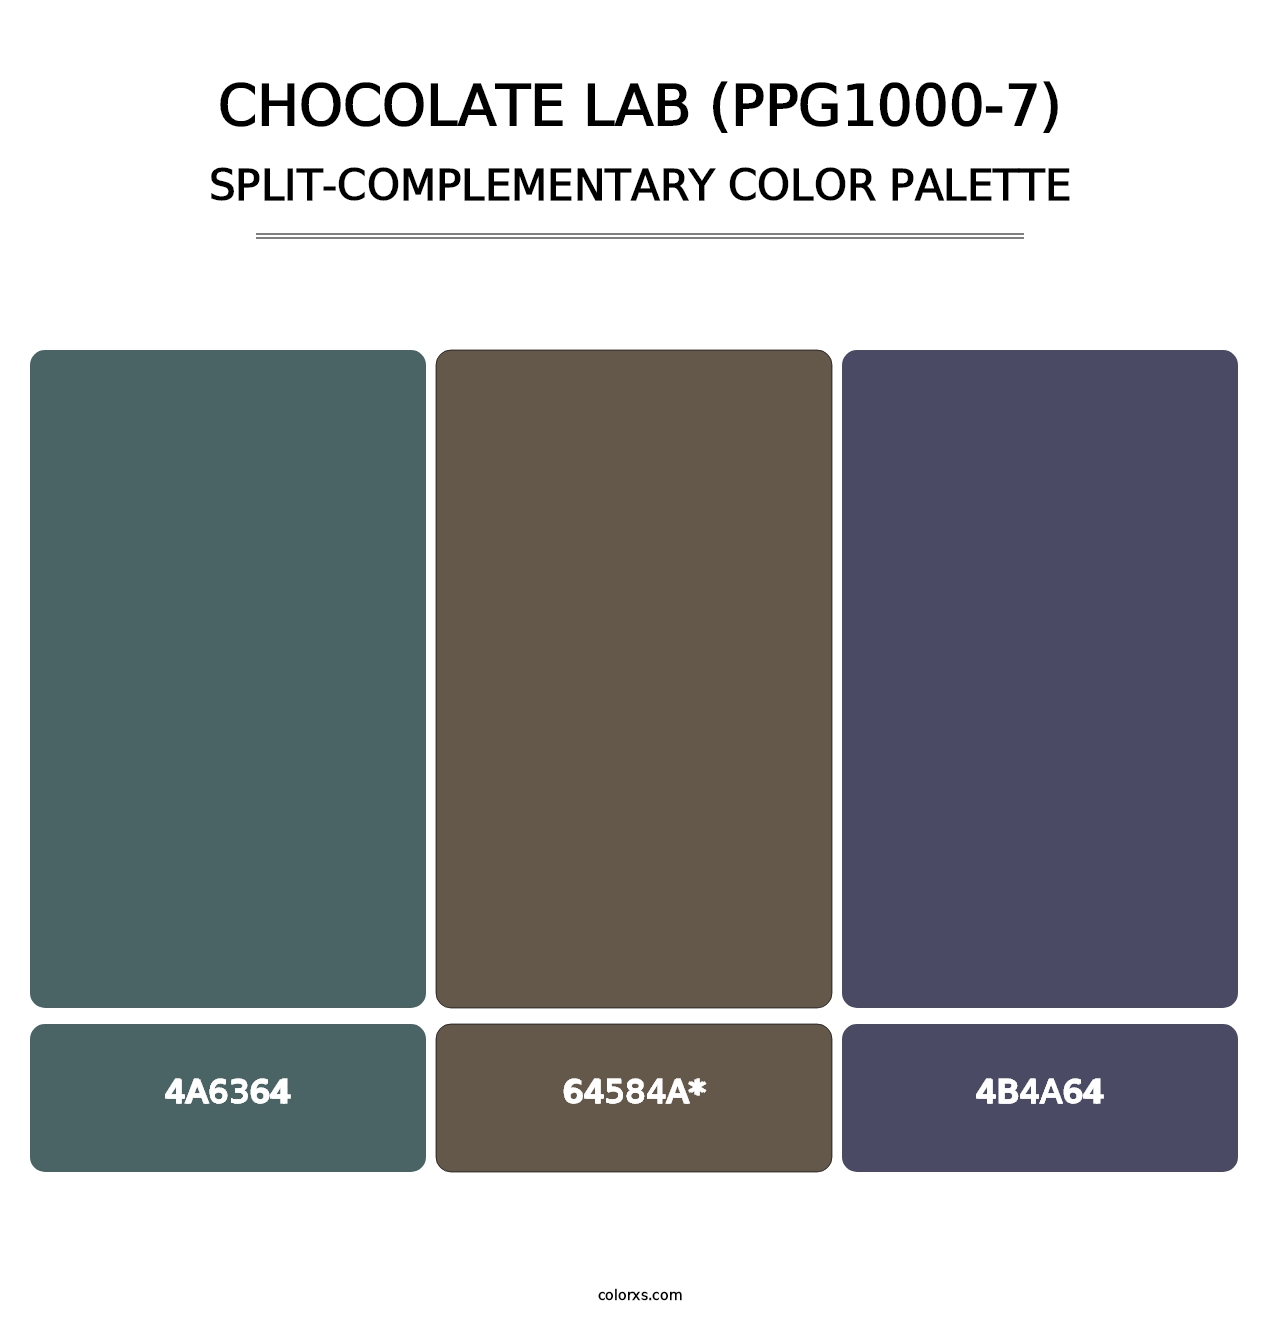 Chocolate Lab (PPG1000-7) - Split-Complementary Color Palette